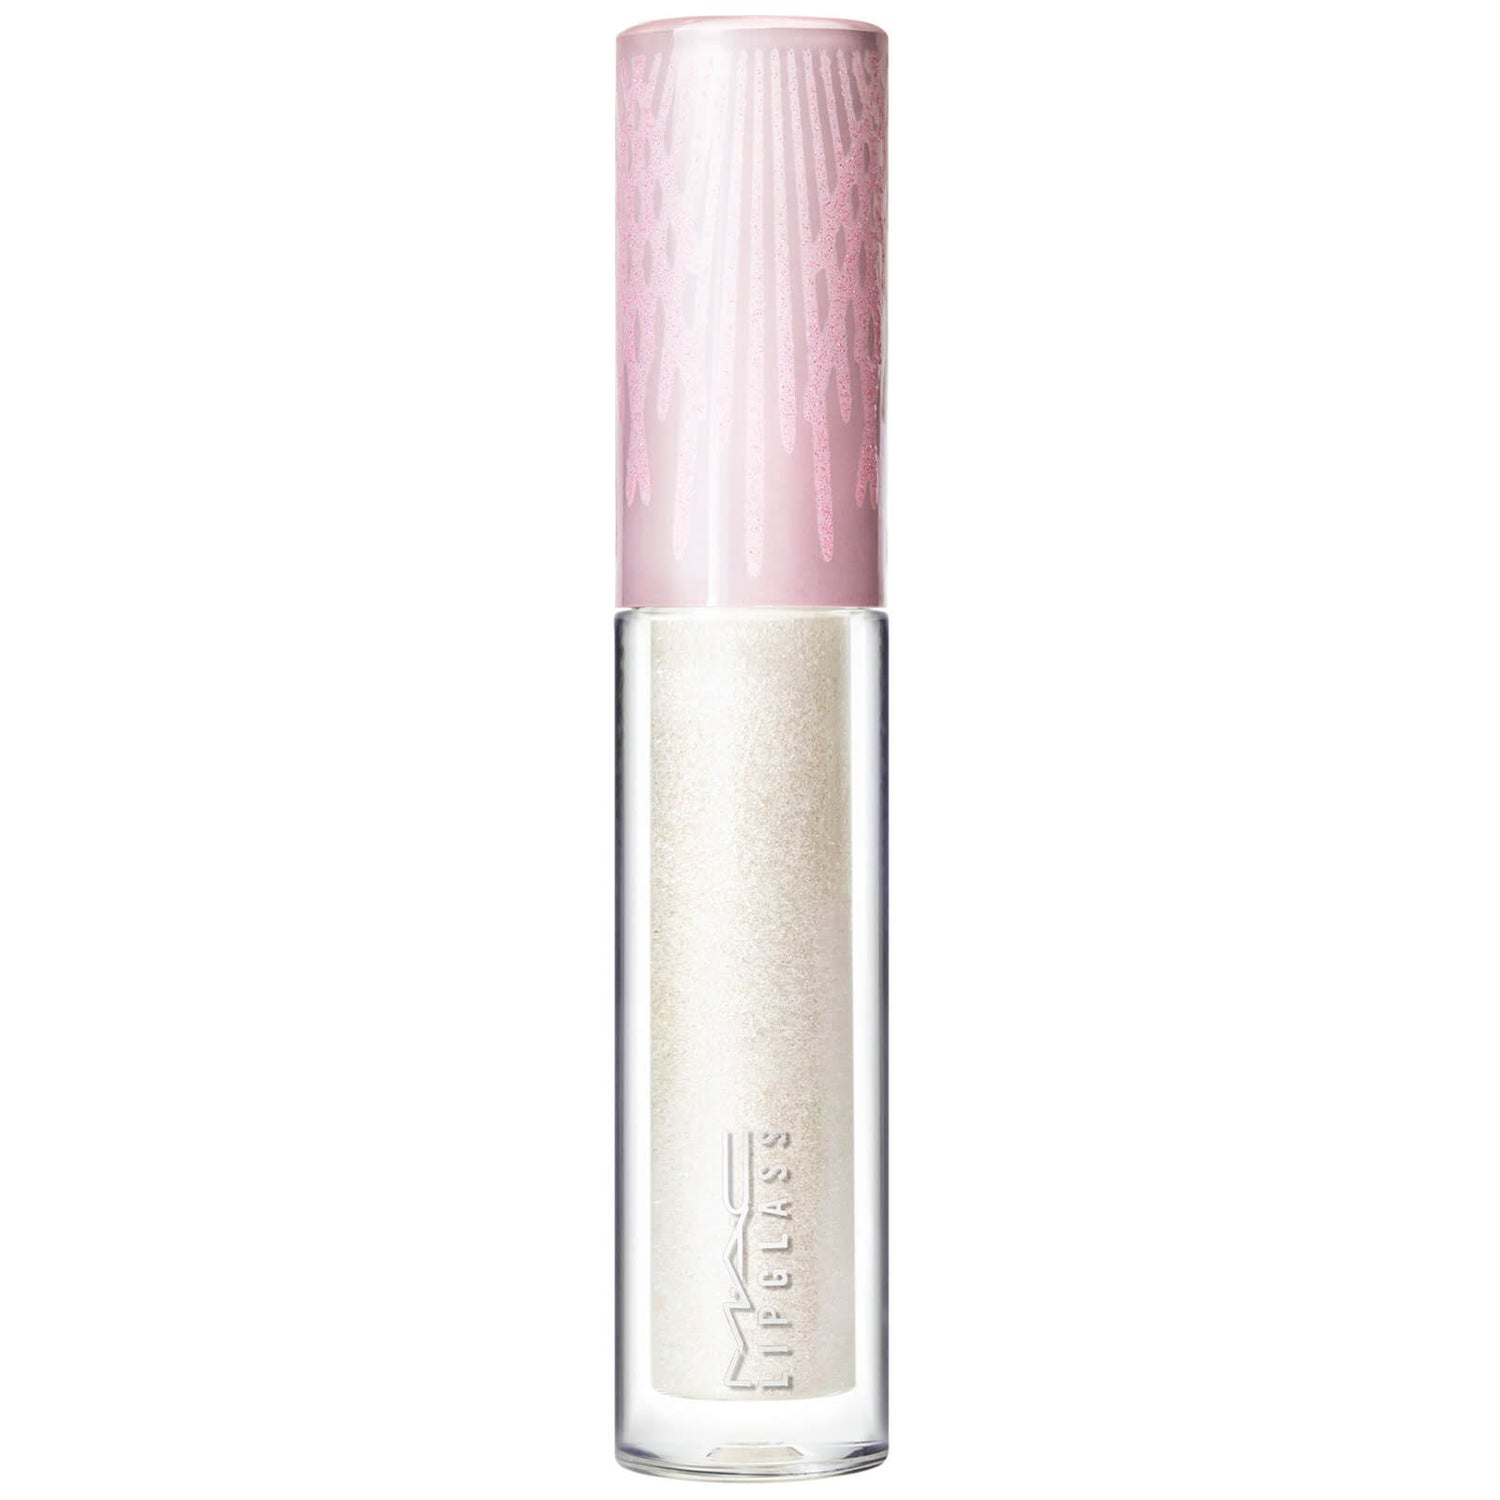 MAC Frosted Firework Lipglass 27g (Various Shades)